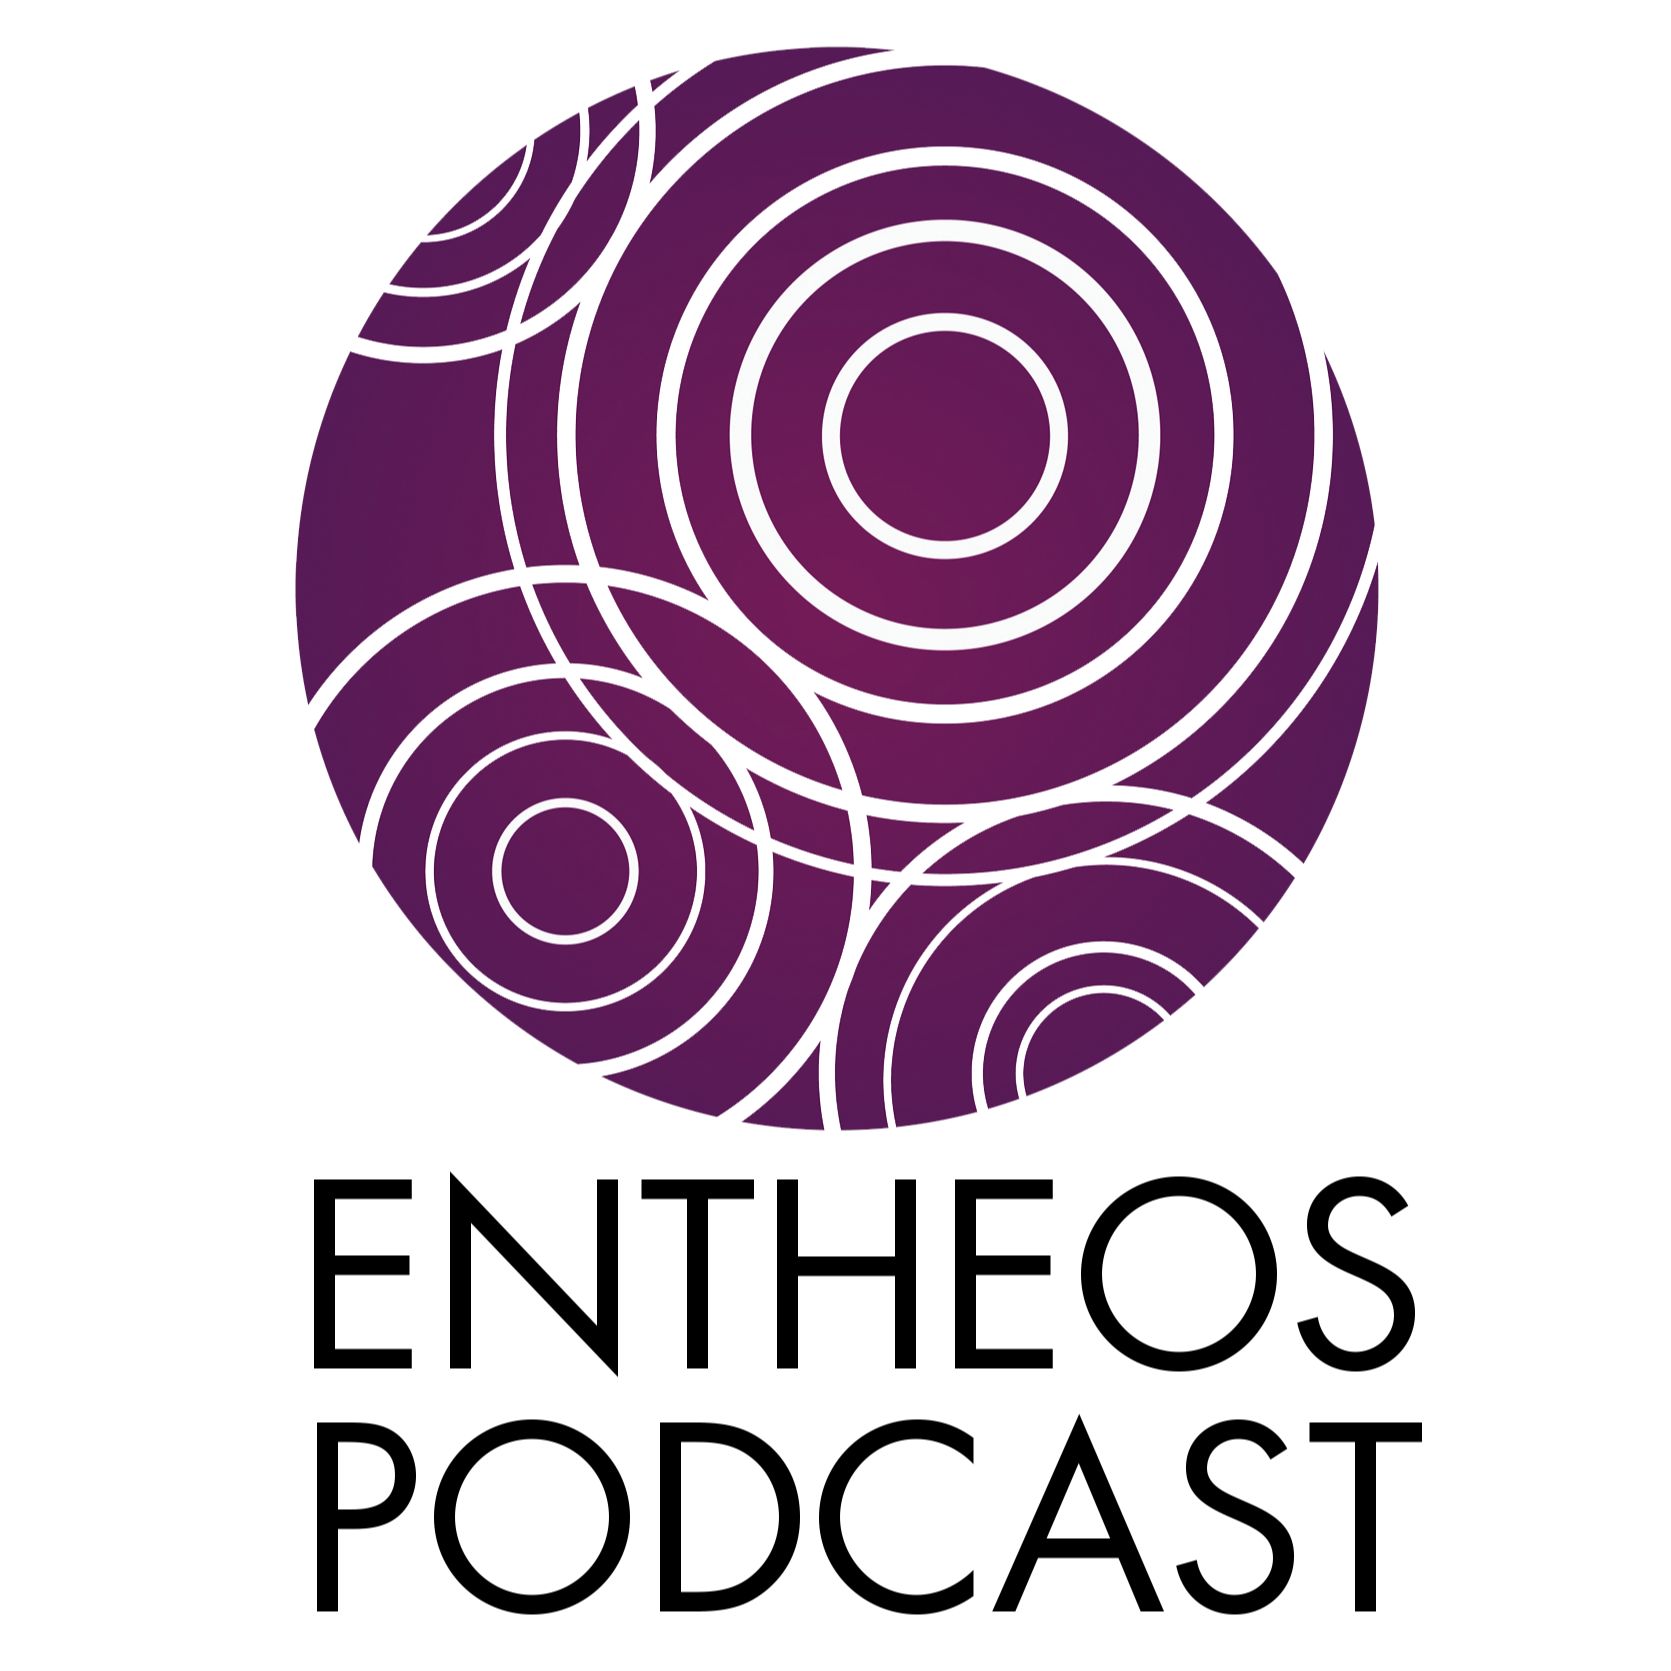 The Entheos Podcast